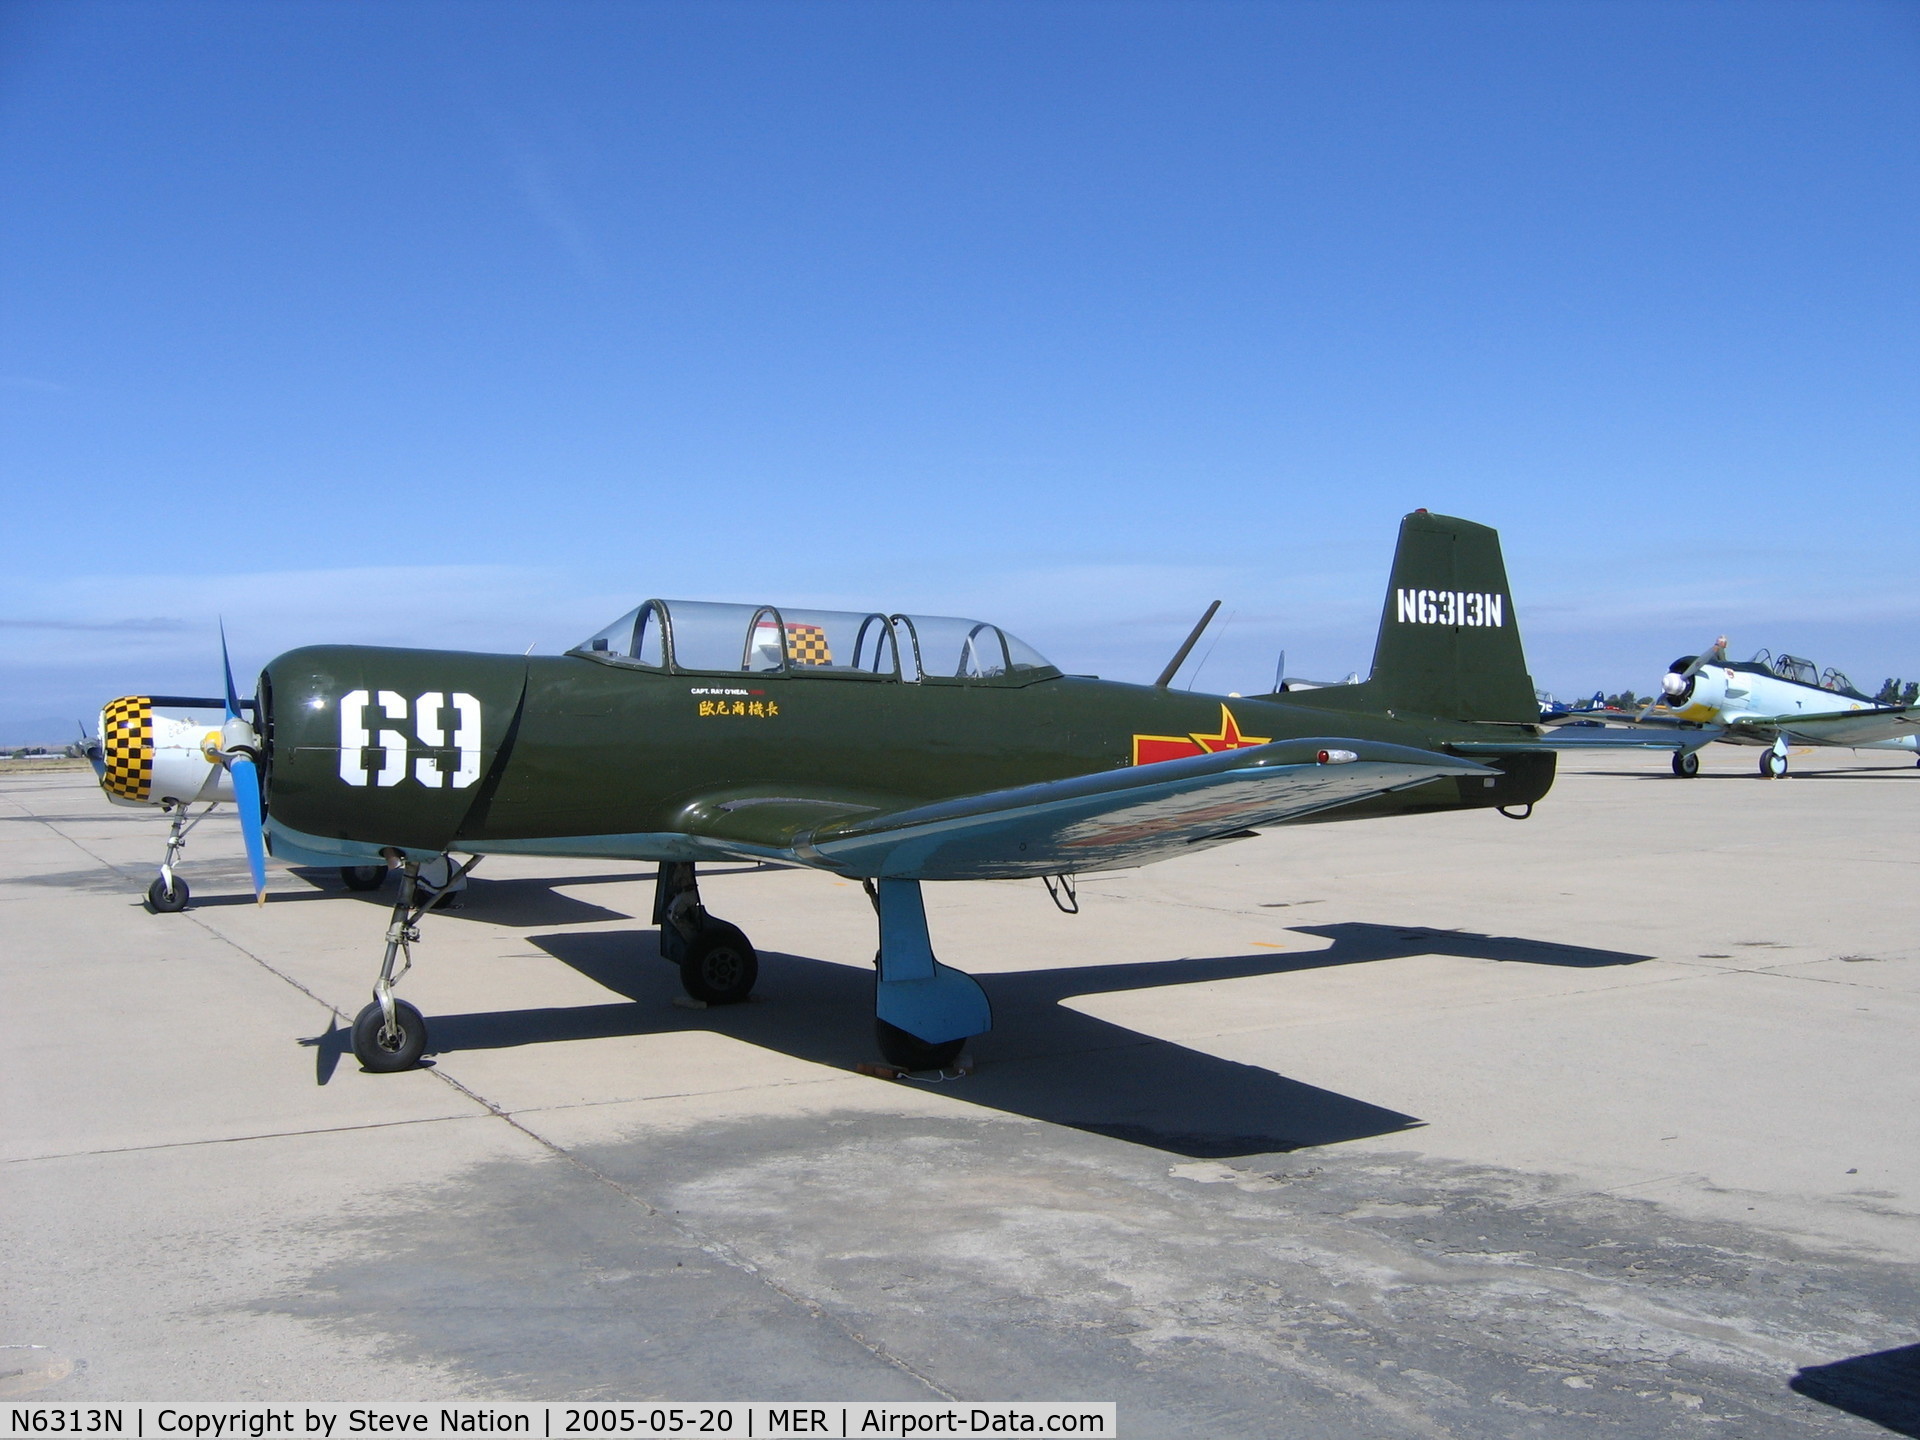 N6313N, 1979 Nanchang CJ-6A C/N 3532022, Ray O'Neal's CJ-6A at West Coast Formation Clinic as Chinese Air Force/69